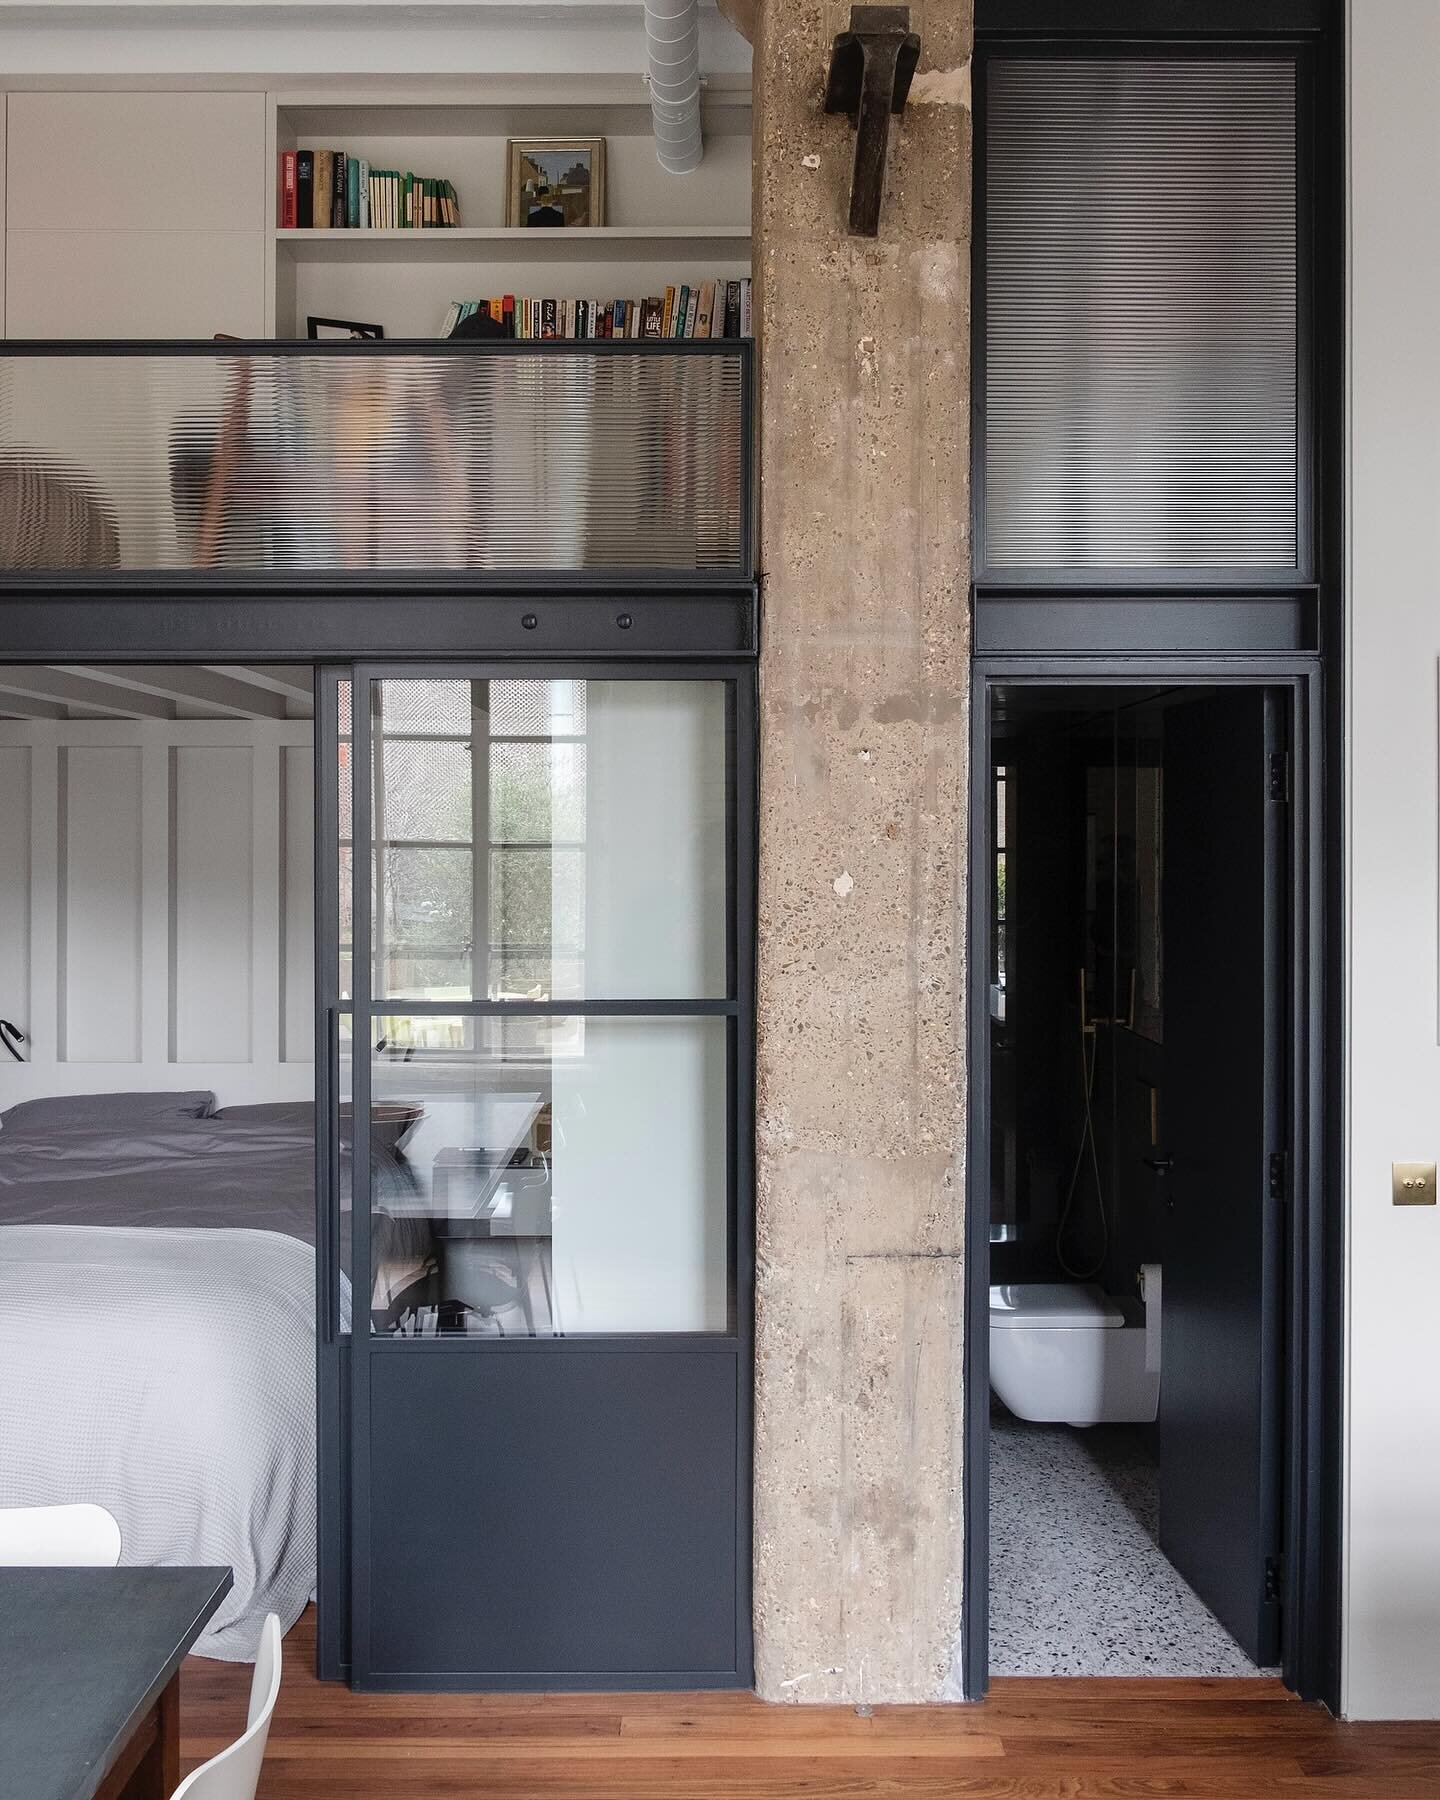 BANKSIDE LOFT

The new structure for the mezzanine is completely free-standing with the perimeter walls of the apartment, made from large sections of timber.

Steel crittall sliding doors and windows enclose the bedroom but allow the space to feel op